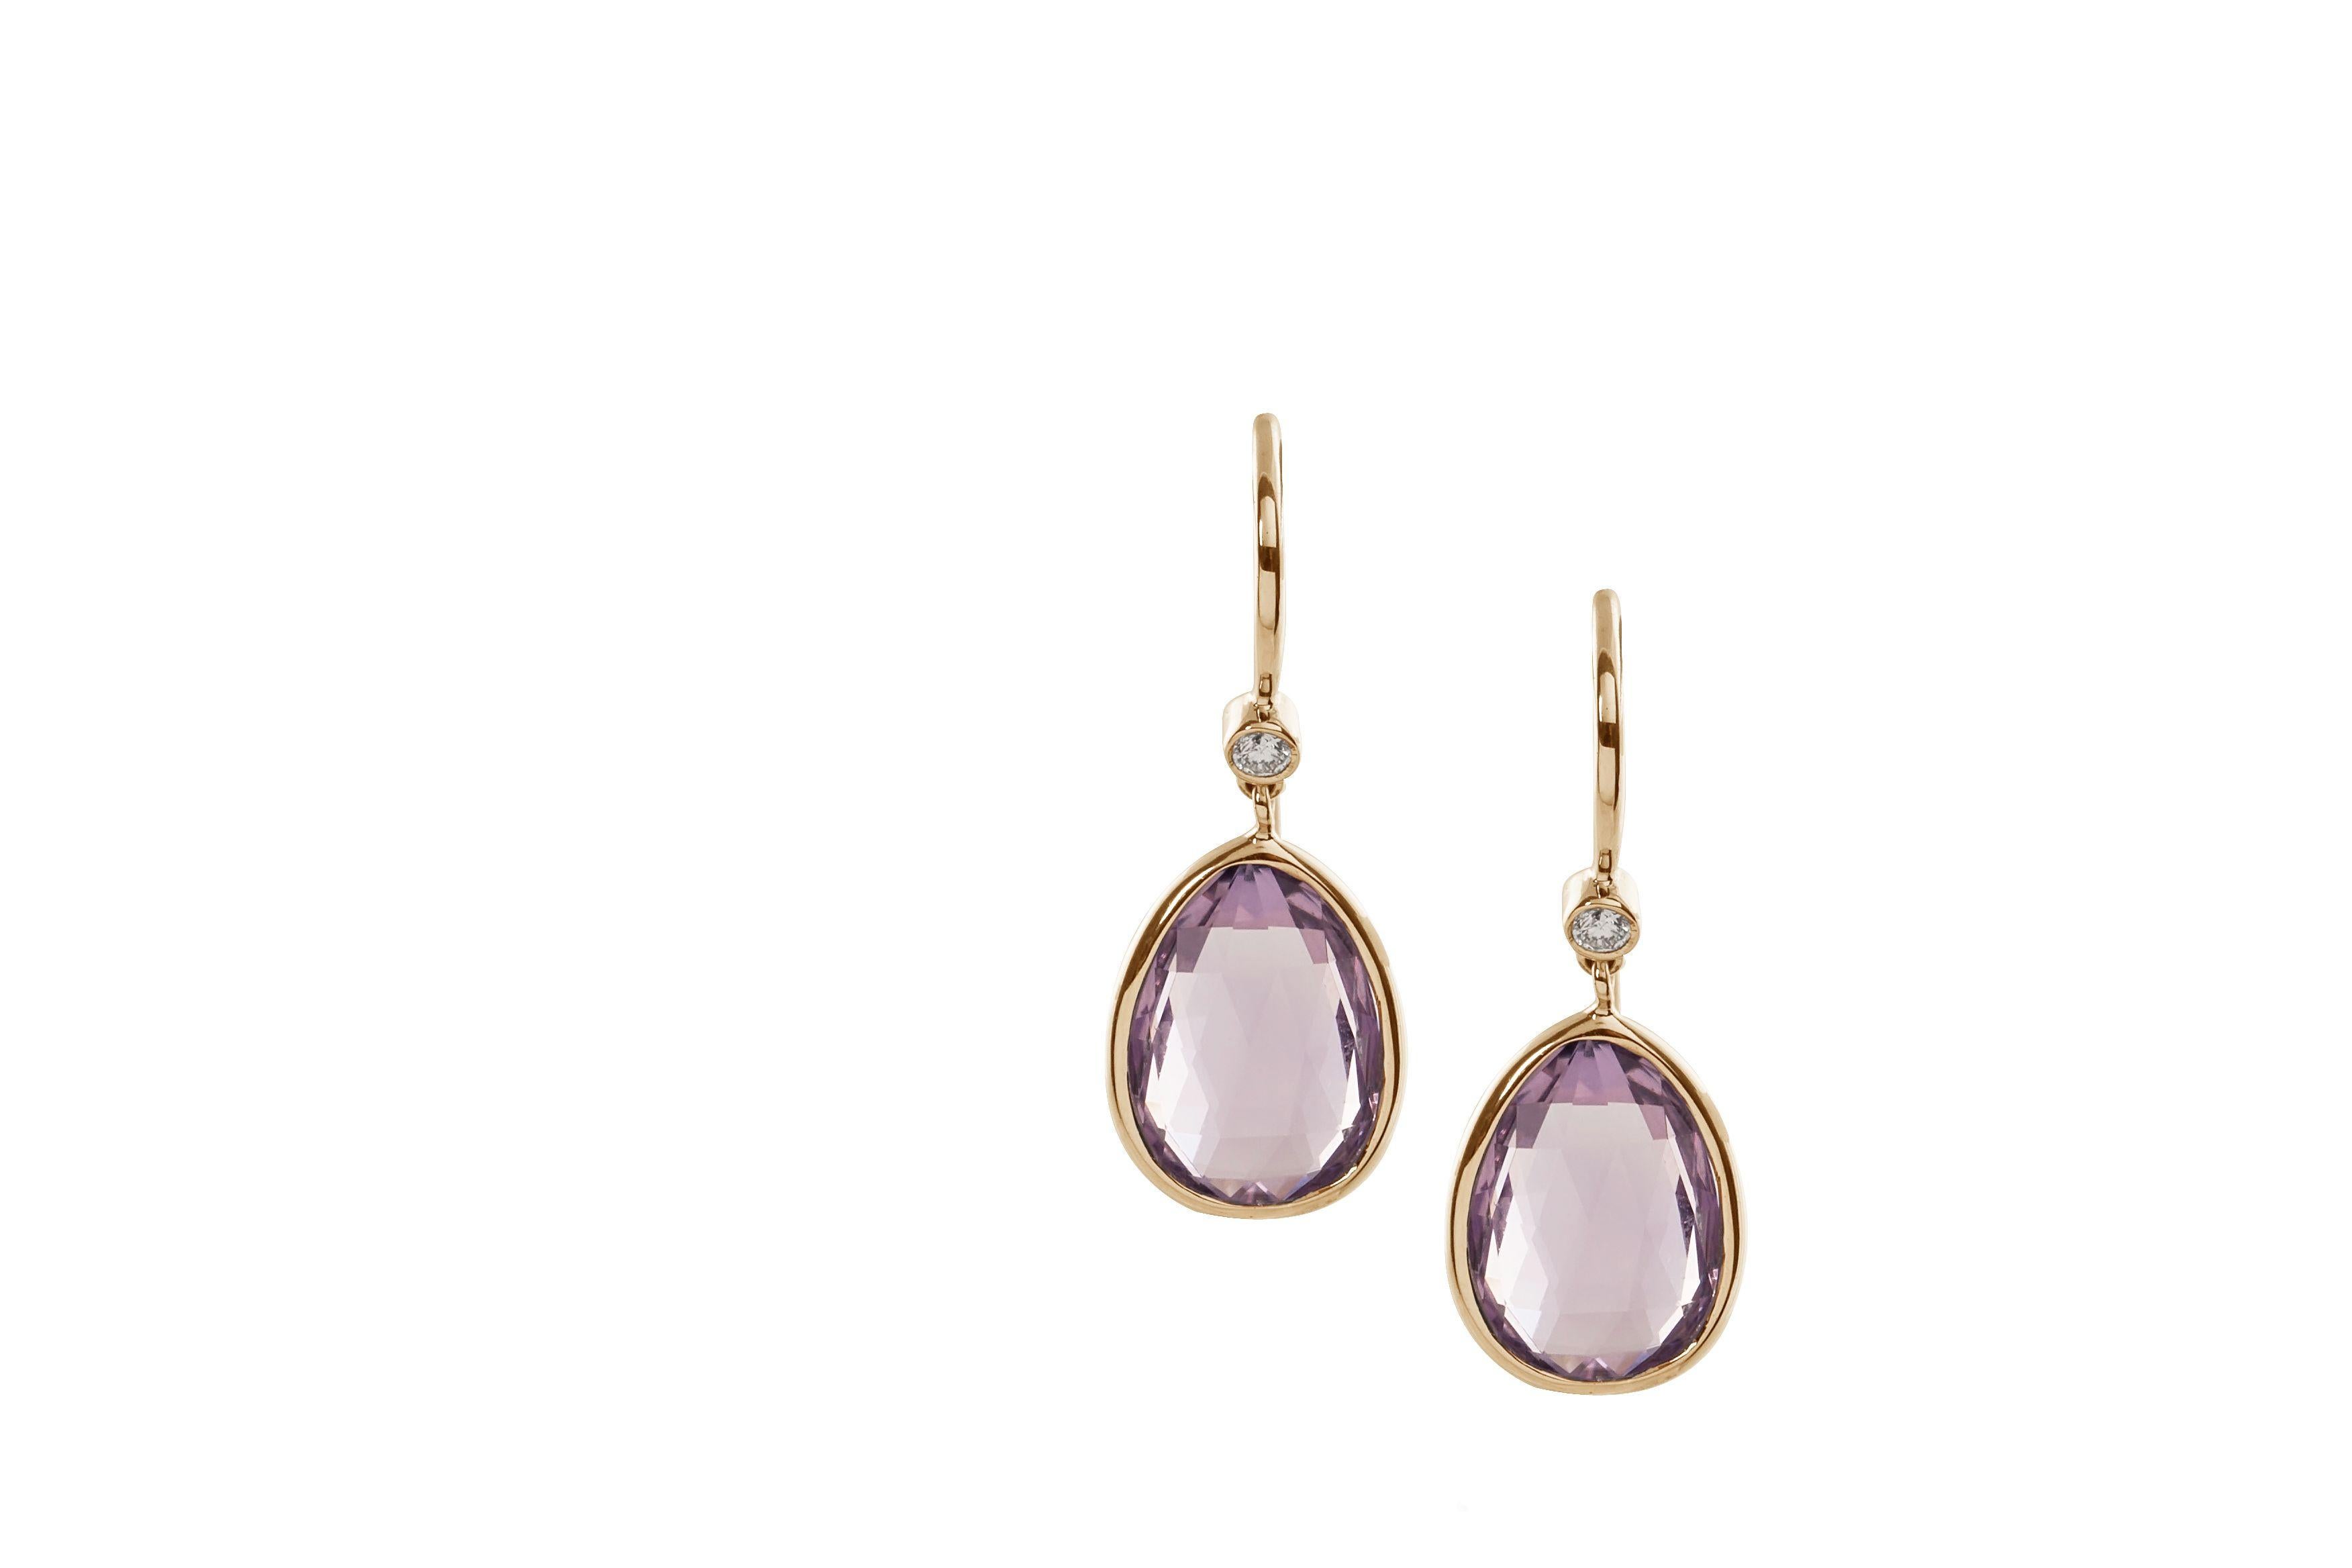 Lavender Amethyst Pear Shape Briolette with Diamond Earrings in 18K Yellow Gold, from 'Gossip' Collection

Stone size: 14 x 20 mm

Gemstone Approx Wt: Lavender Amethyst - 28.60 Carats

Diamonds: G-H / VS, Approx Wt 0.14 Carats